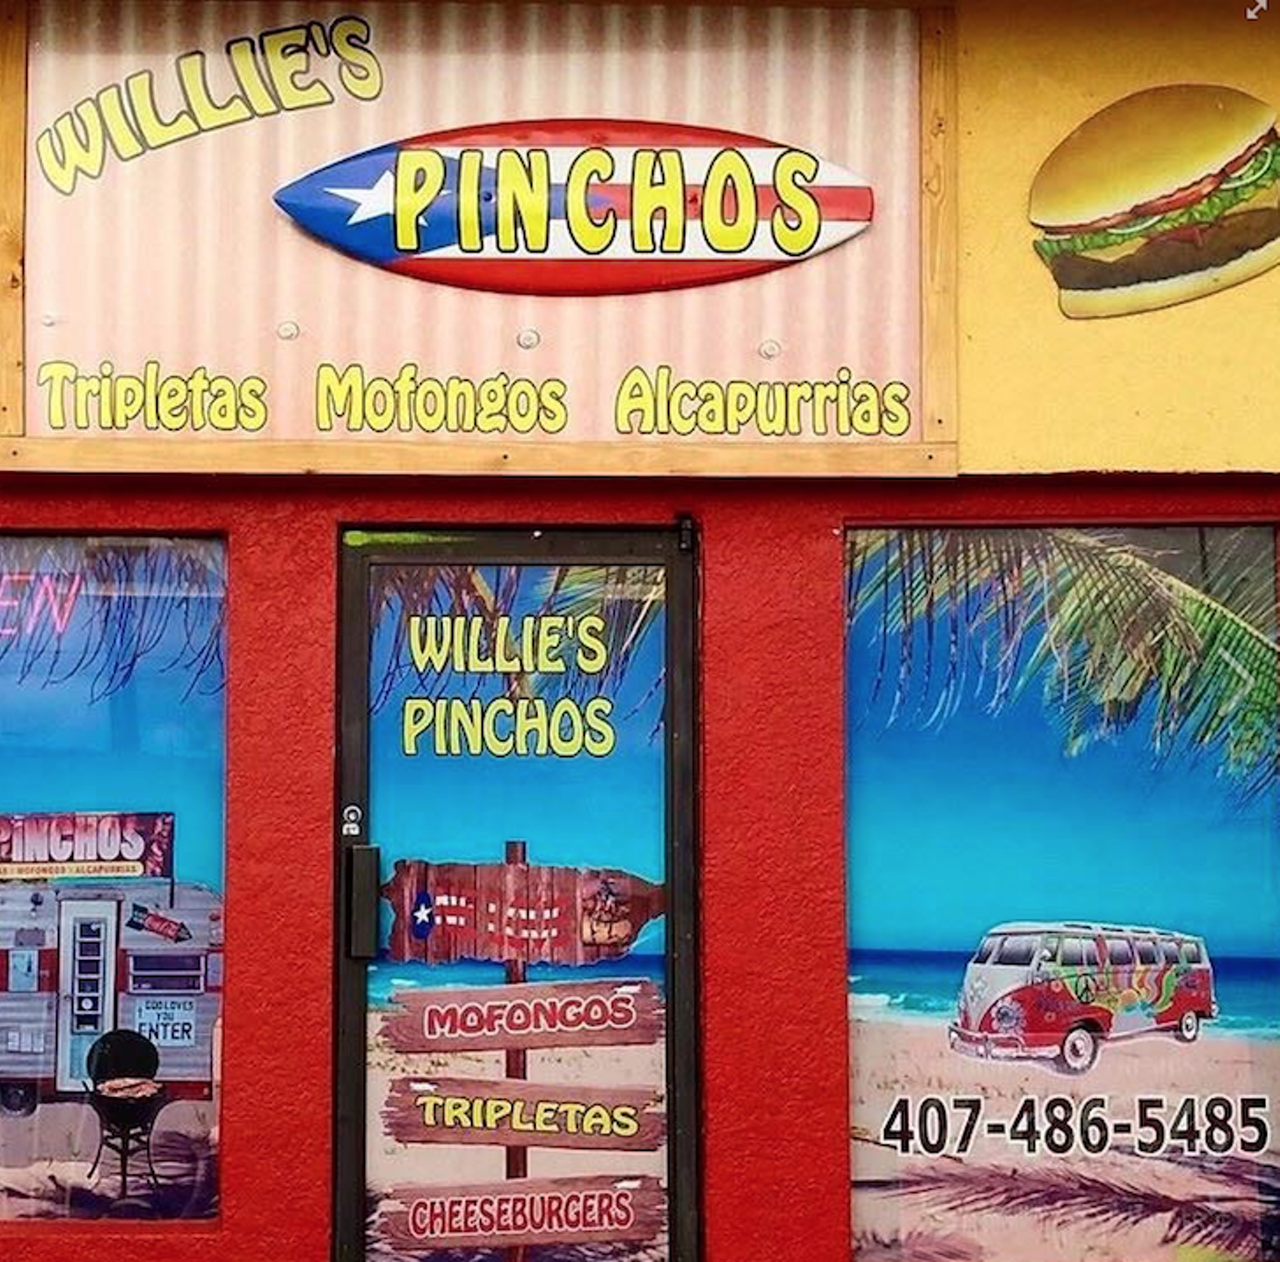  Willie&#146;s Pincho&#146;s Restaurant
1718 N Goldenrod Rd, Orlando, (407)-601-3373
Location can make this Puerto Rican delicacy easy to overlook, but don&#146;t. Burgers, meats and good eats with some Latin flavor sets this lunch and dinner spot apart from the everyday deli sandwich or soup. 
Photo via Willie's Pincho's/Facebook